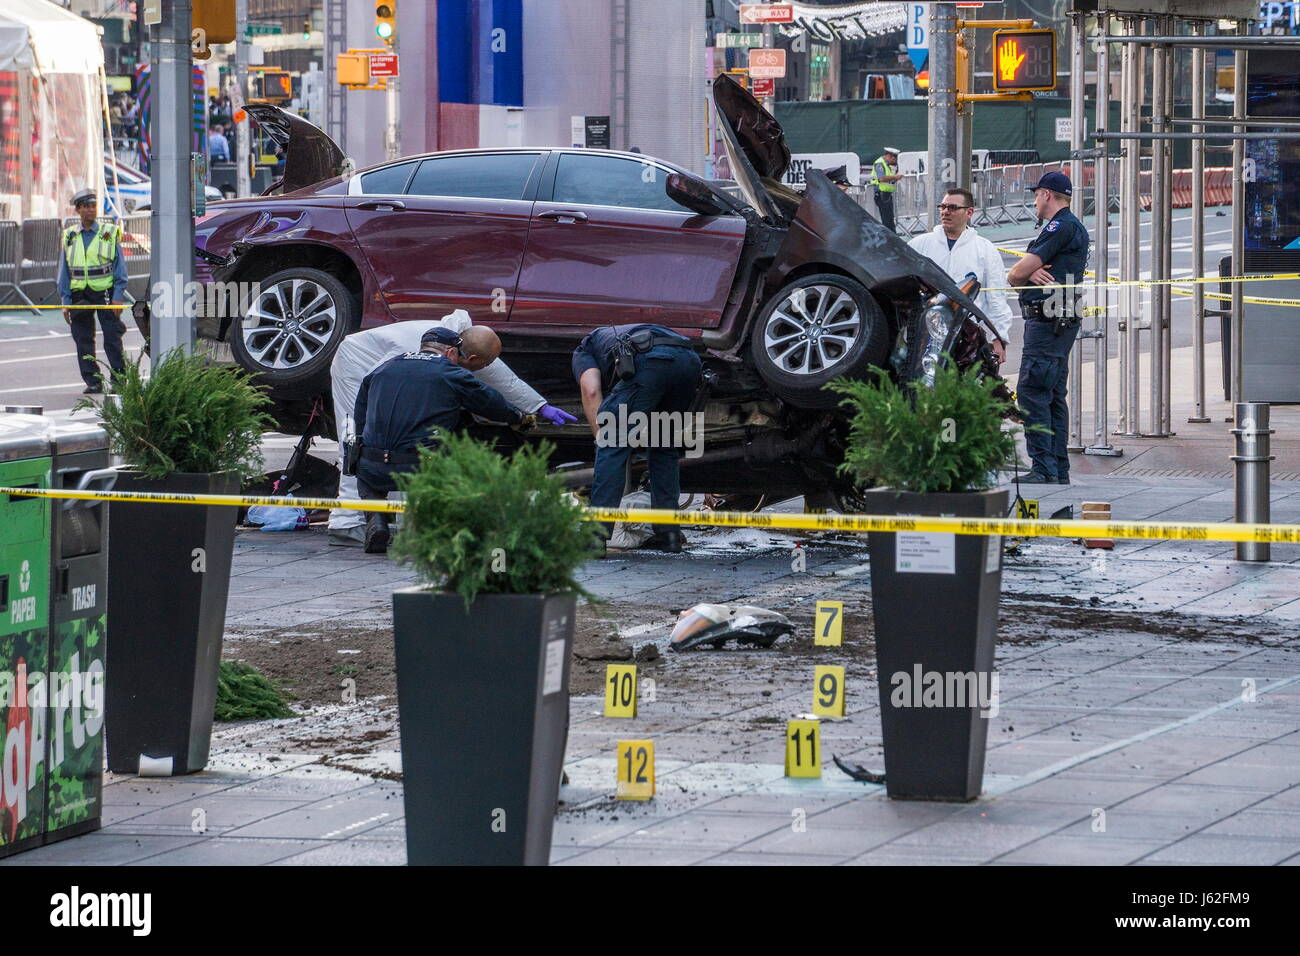 New York, New York, USA. 18th May, 2017. Crime scene markers near the damaged vehicle as Police officers and emergency workers investigate the scene of a car crash in Times Square that took the life of an 18 year-old Michigan girl and injured 22 others. Credit: Kevin C. Downs/ZUMA Wire/ZUMAPRESS.com/Alamy Live News Stock Photo